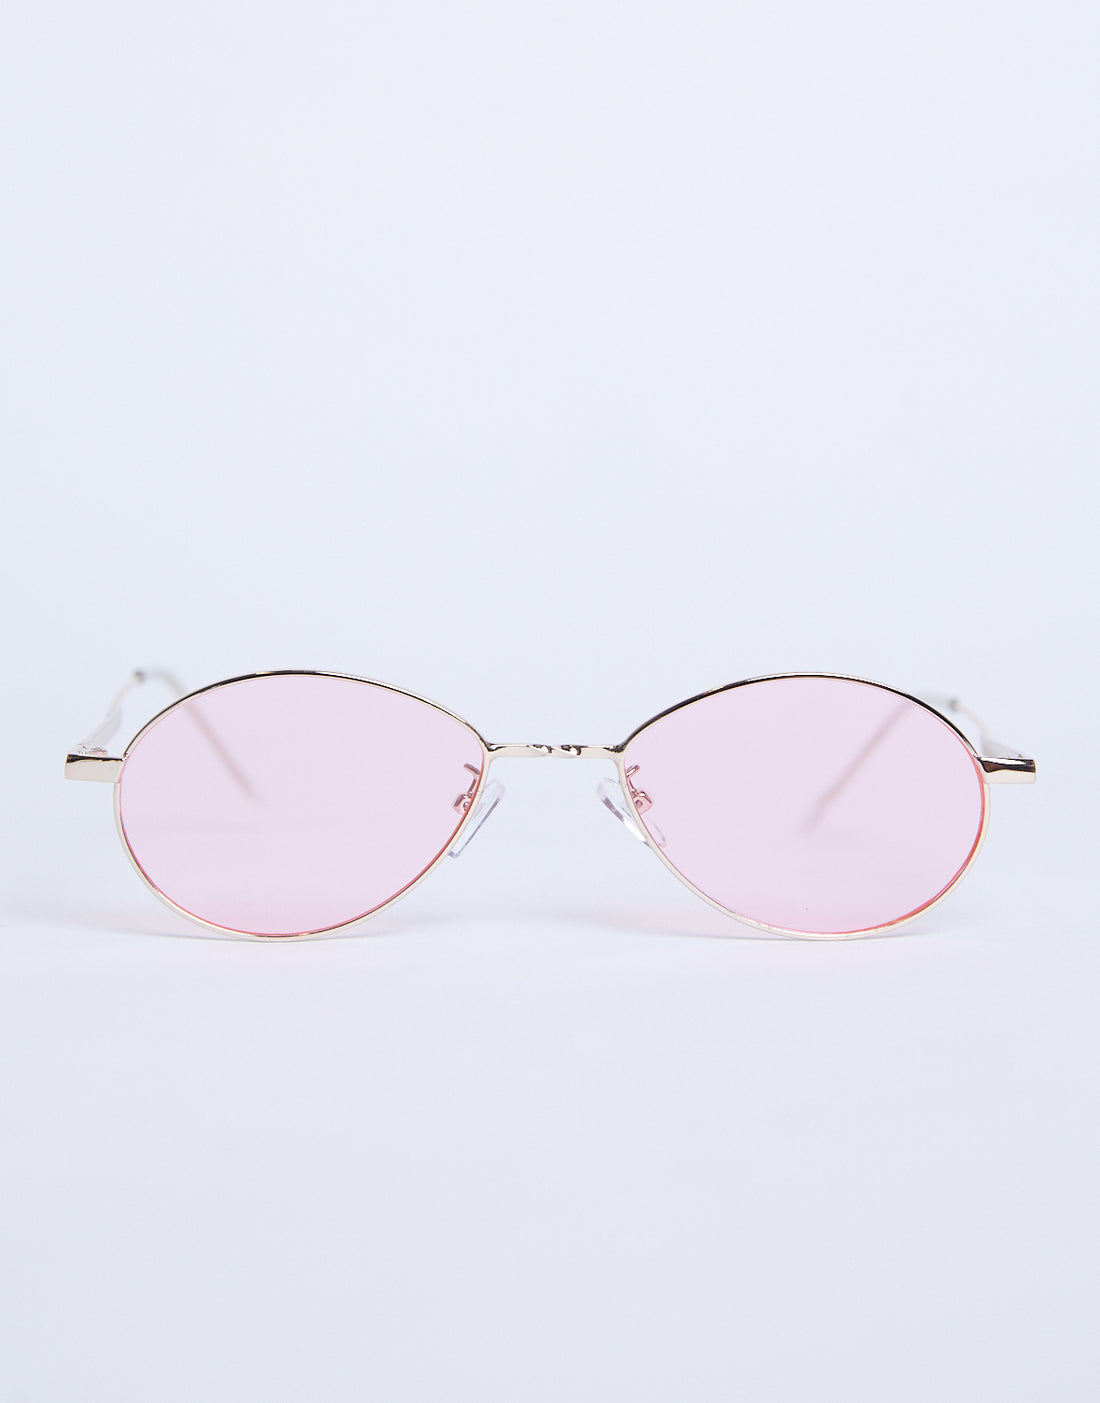 Retro Days Colored Sunglasses Accessories Pink One Size -2020AVE